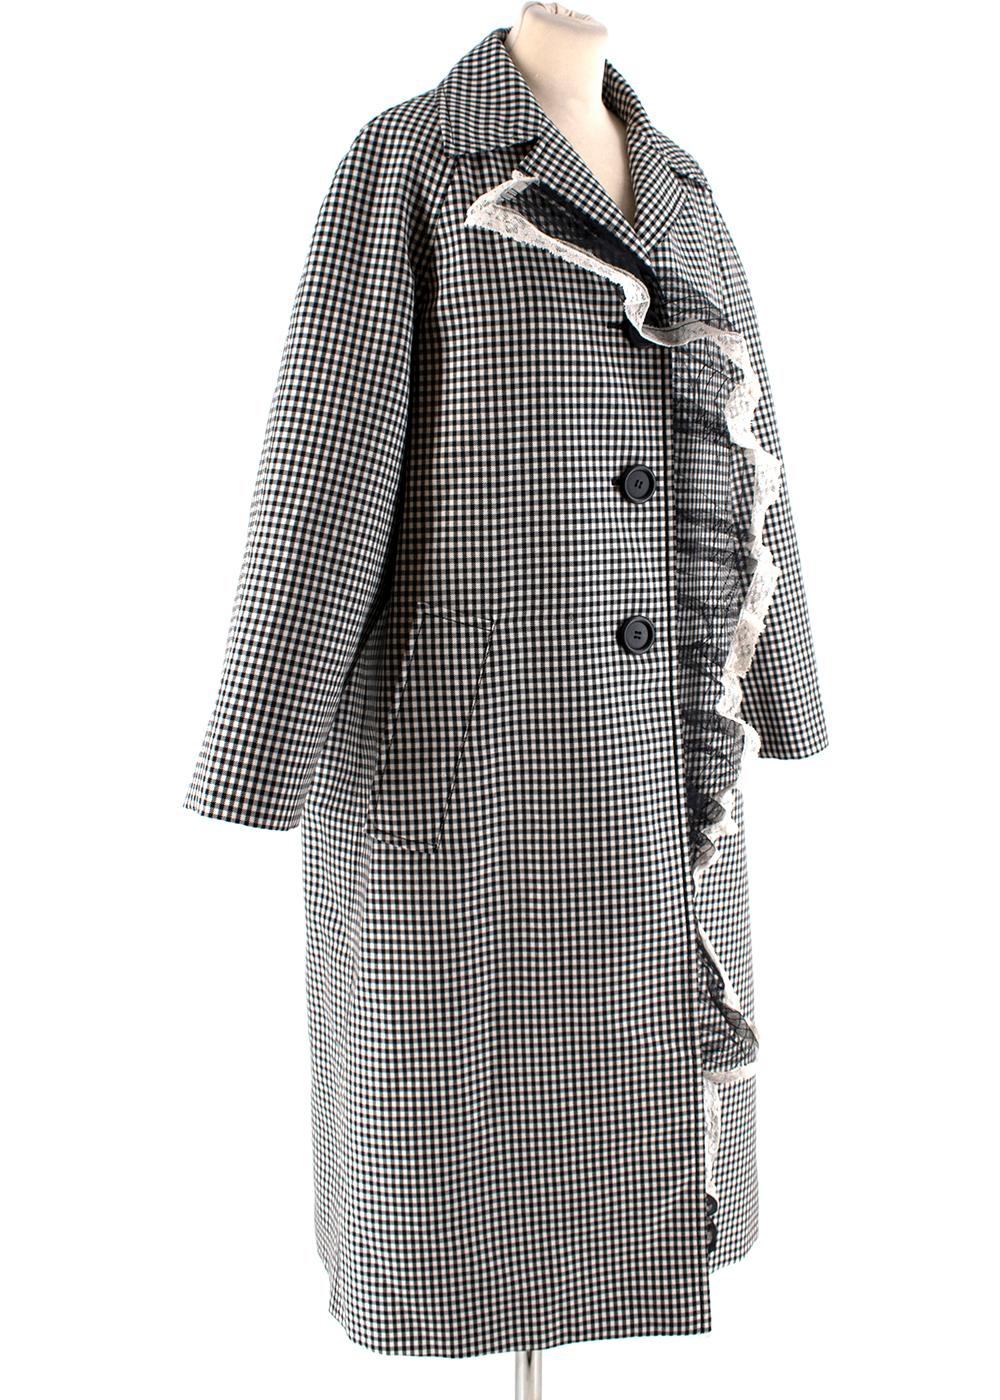 Miu Miu Wool & Mohair Gingham Coat with Lace Detail 

-Perfect for a beautiful winter day 
-Luxurious smooth wool and mohair texture 
-Classic style with a twist
-Lace ruffle detail to the right  
-Raglan sleeve 
-2 front pockets
-Spare button